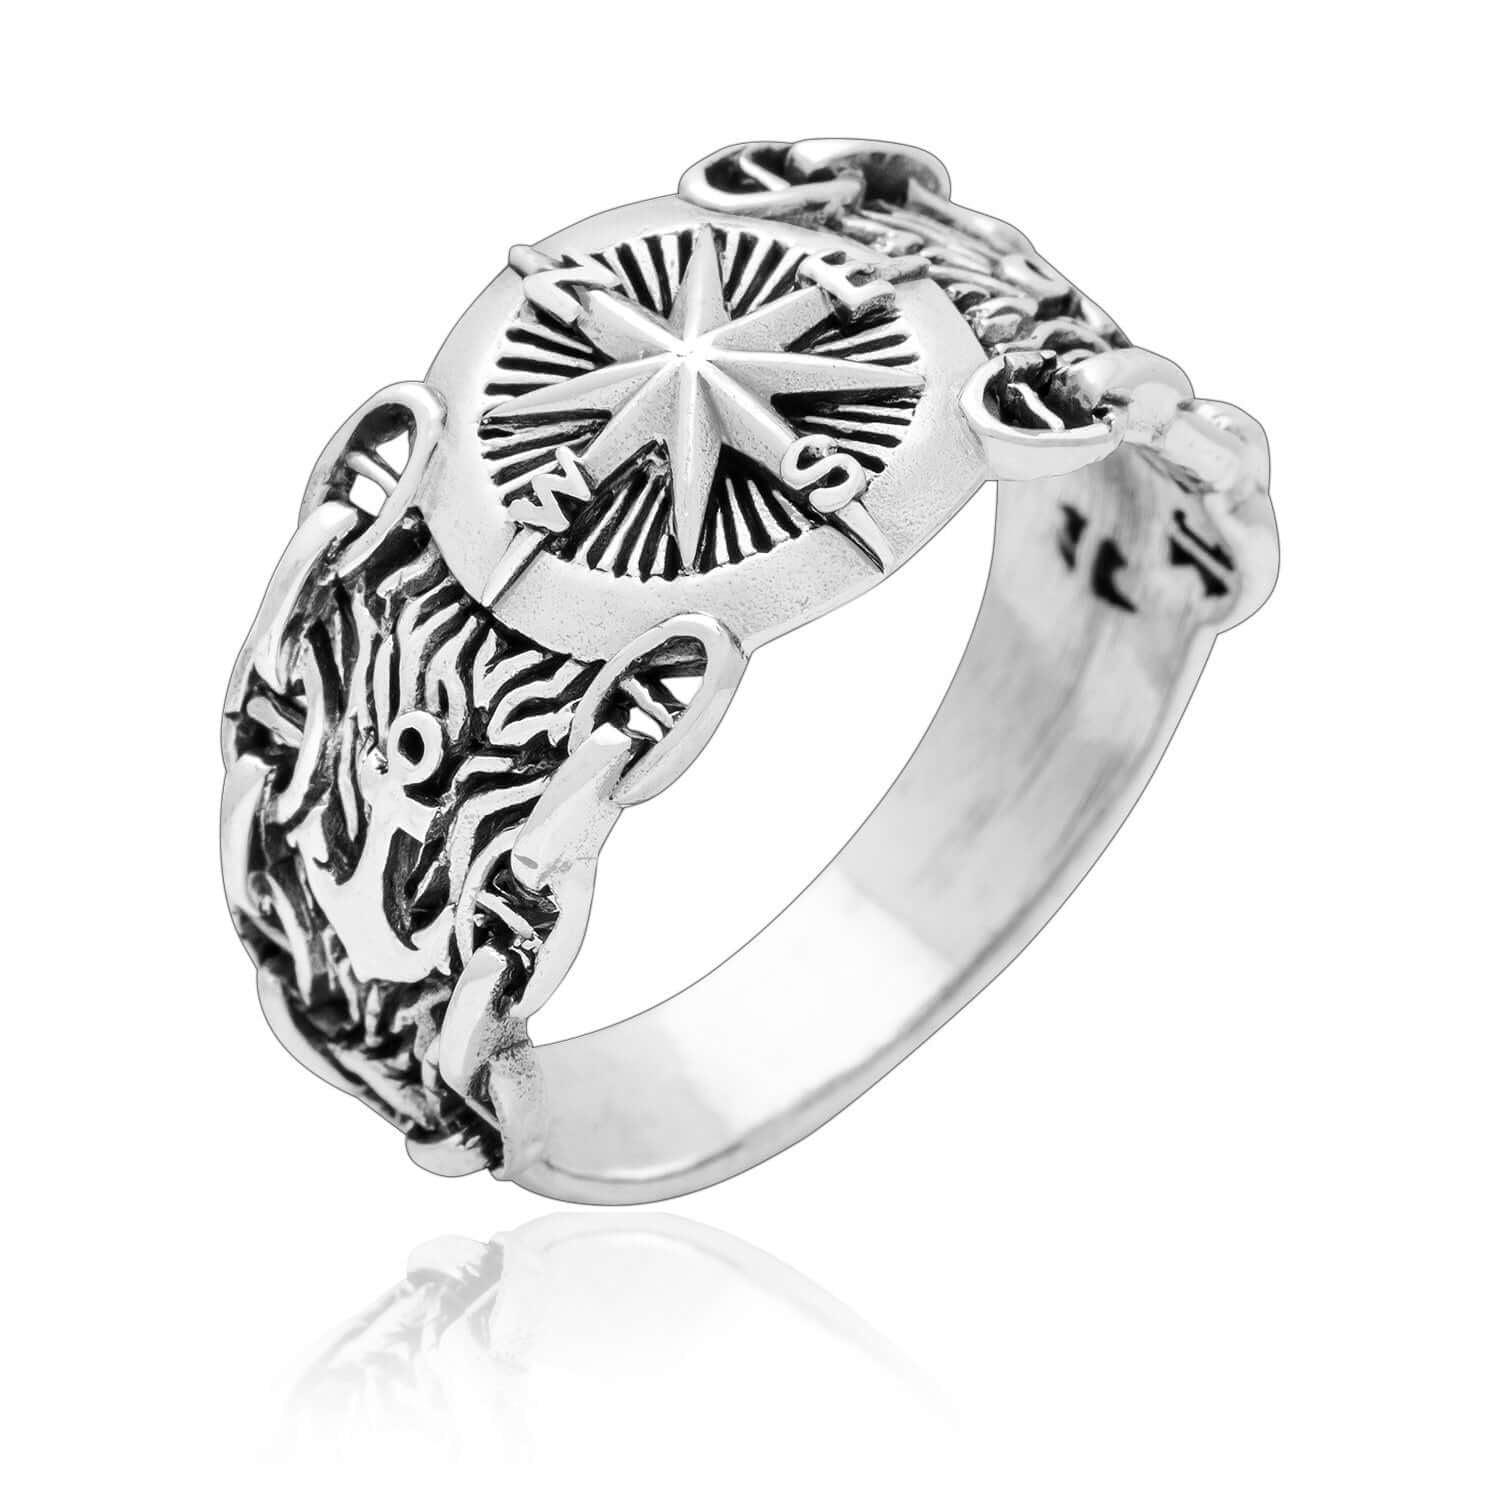 925 Sterling Silver Nautical Compass Ring with Chains and Anchor - SilverMania925